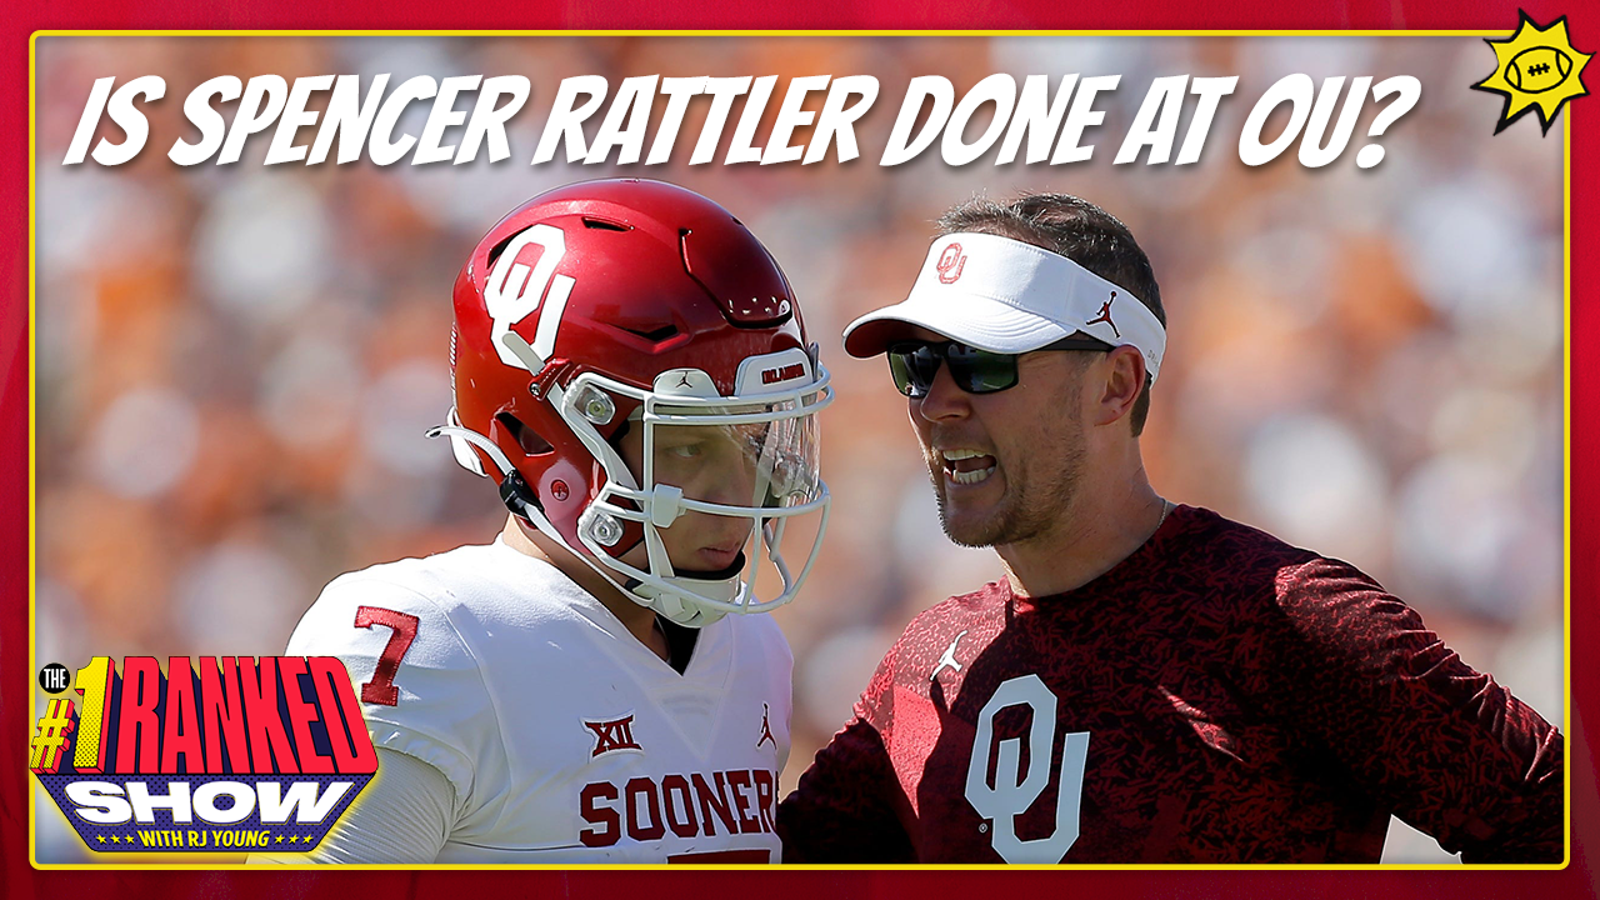 Has Spencer Rattler played his last game at Oklahoma?